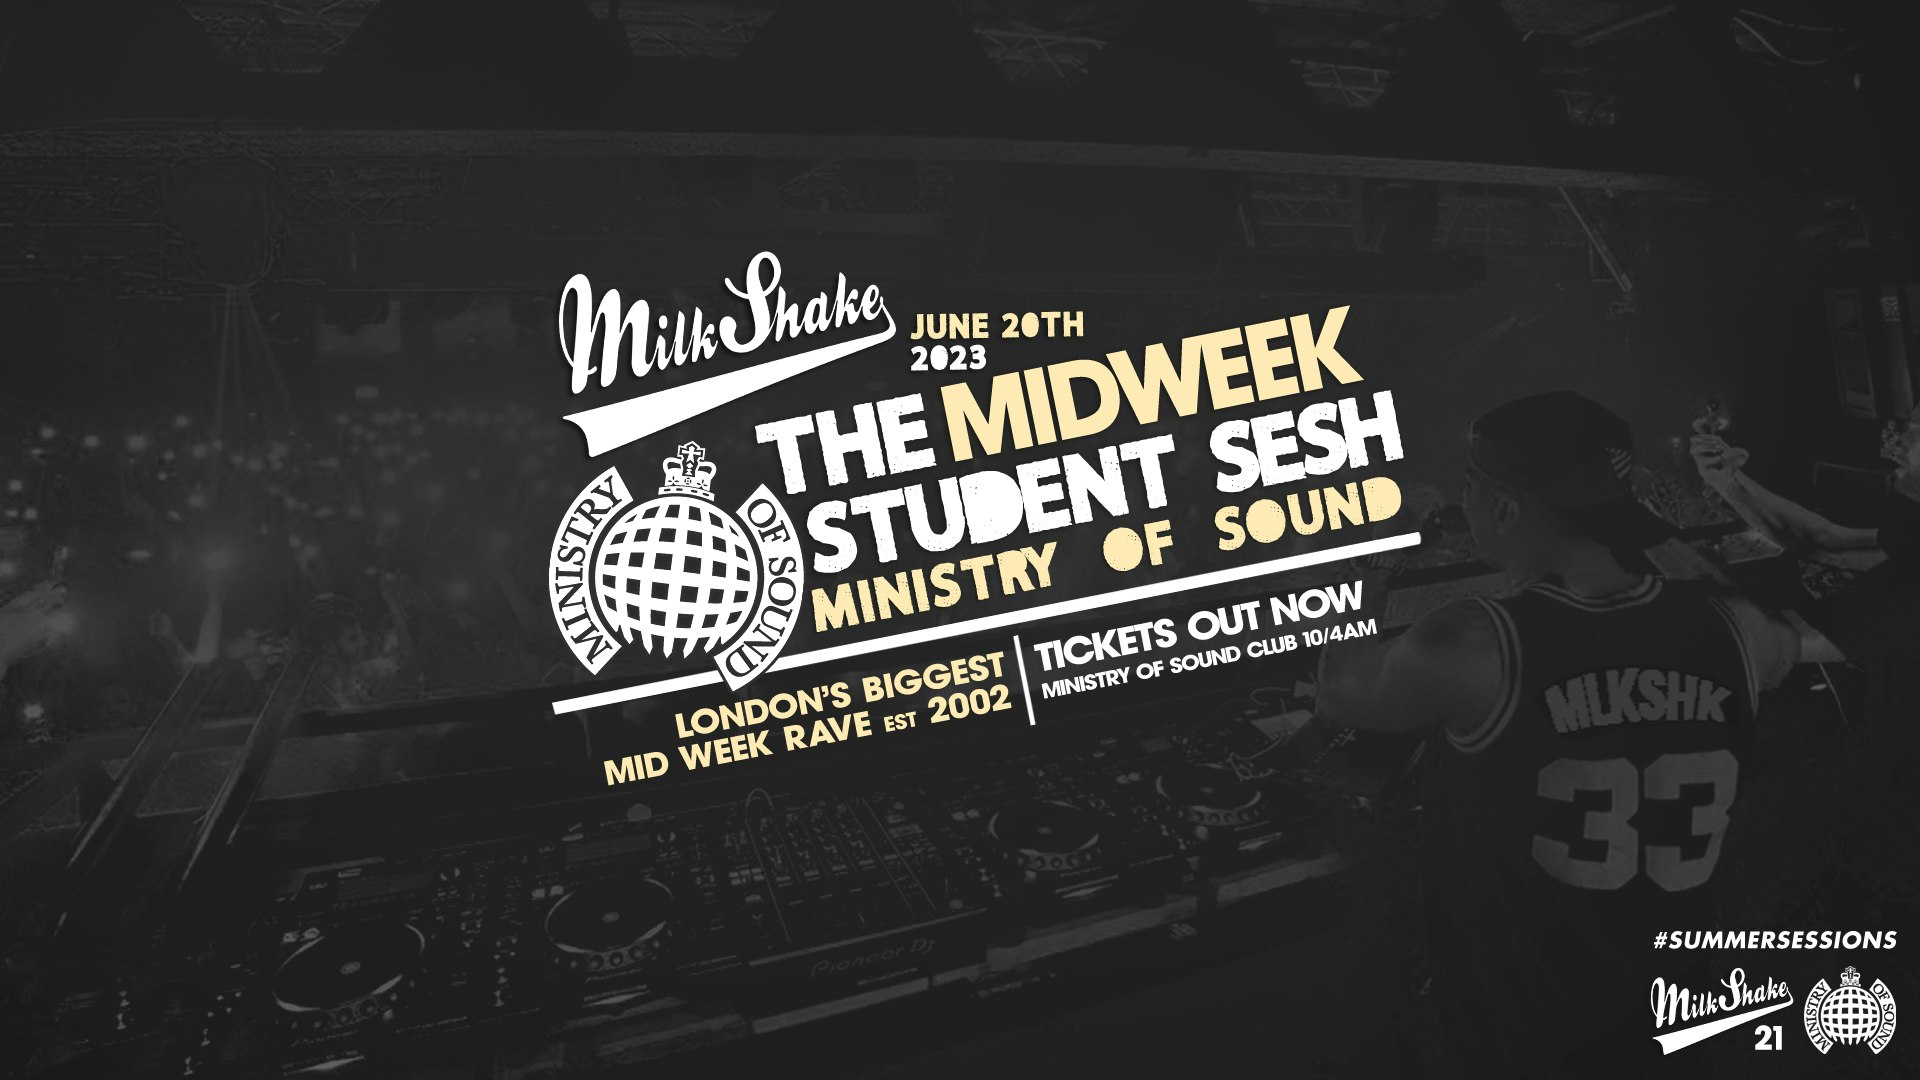 ⛔ SOLD OUT ⛔ Milkshake, Ministry of Sound | London’s Biggest Student Night 🔥June 20th 2023 🌍